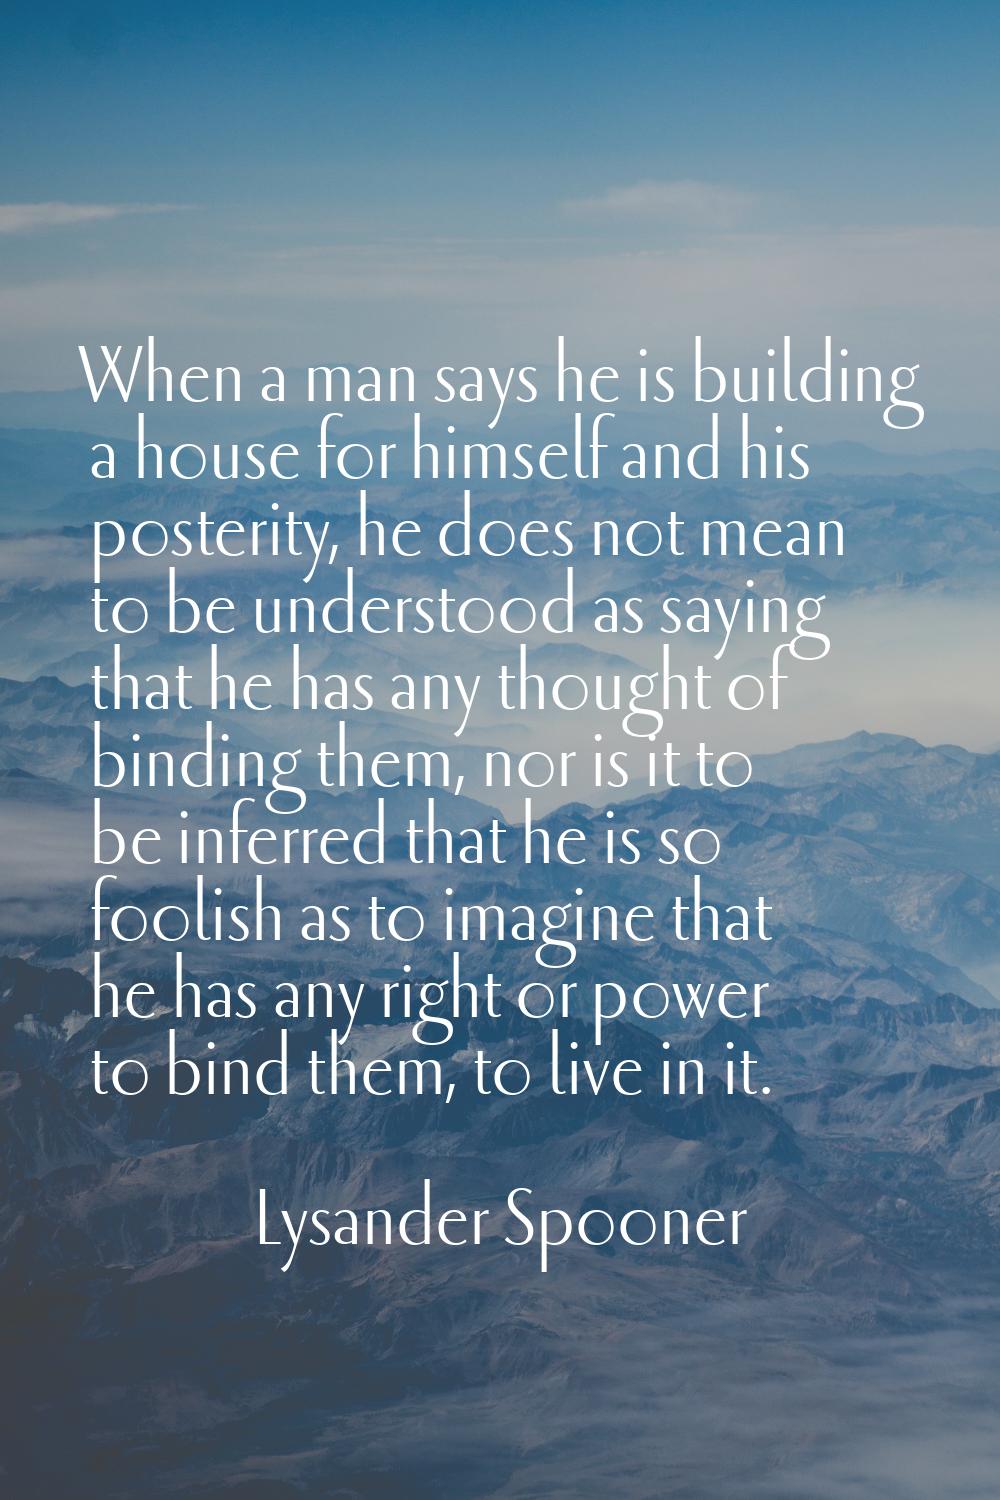 When a man says he is building a house for himself and his posterity, he does not mean to be unders